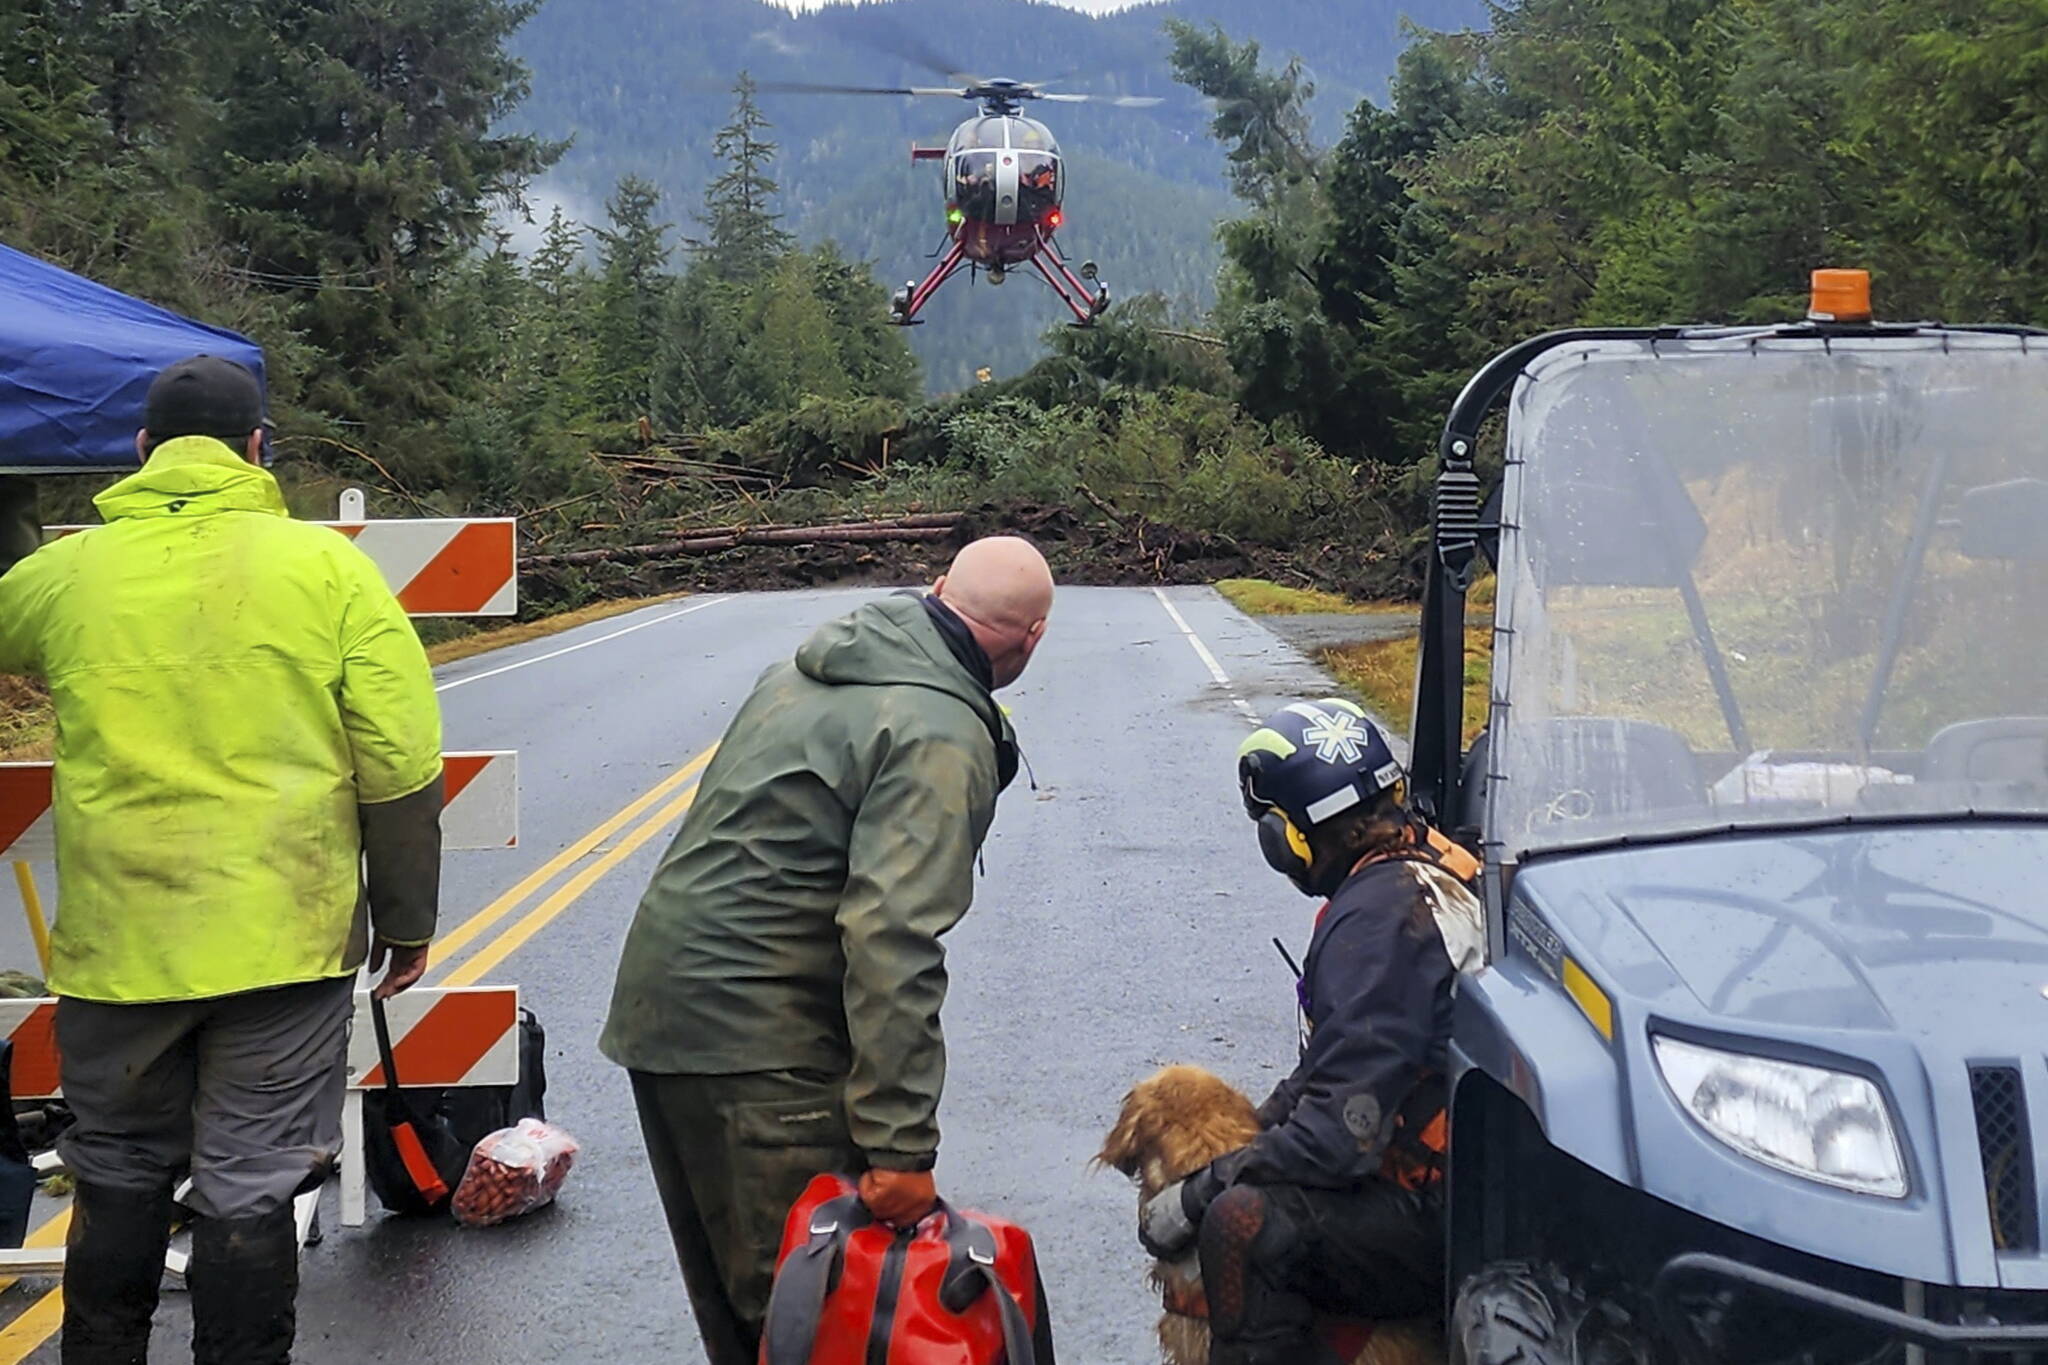 This photo provided by Division of Homeland Security and Emergency Management shows a helicopter arriving near mile 11 of the Zimovia Highway where ground teams, including search and rescue dogs, are actively working to search areas that state geologists have determined safe for entry Wednesday in Wrangell following a massive landslide earlier in the week. Three people have died and searchers looked Wednesday for three others who remain missing after a landslide ripped through a remote Alaska fishing community on Monday. (Willis Walunga/Division of Homeland Security and Emergency Management via AP)